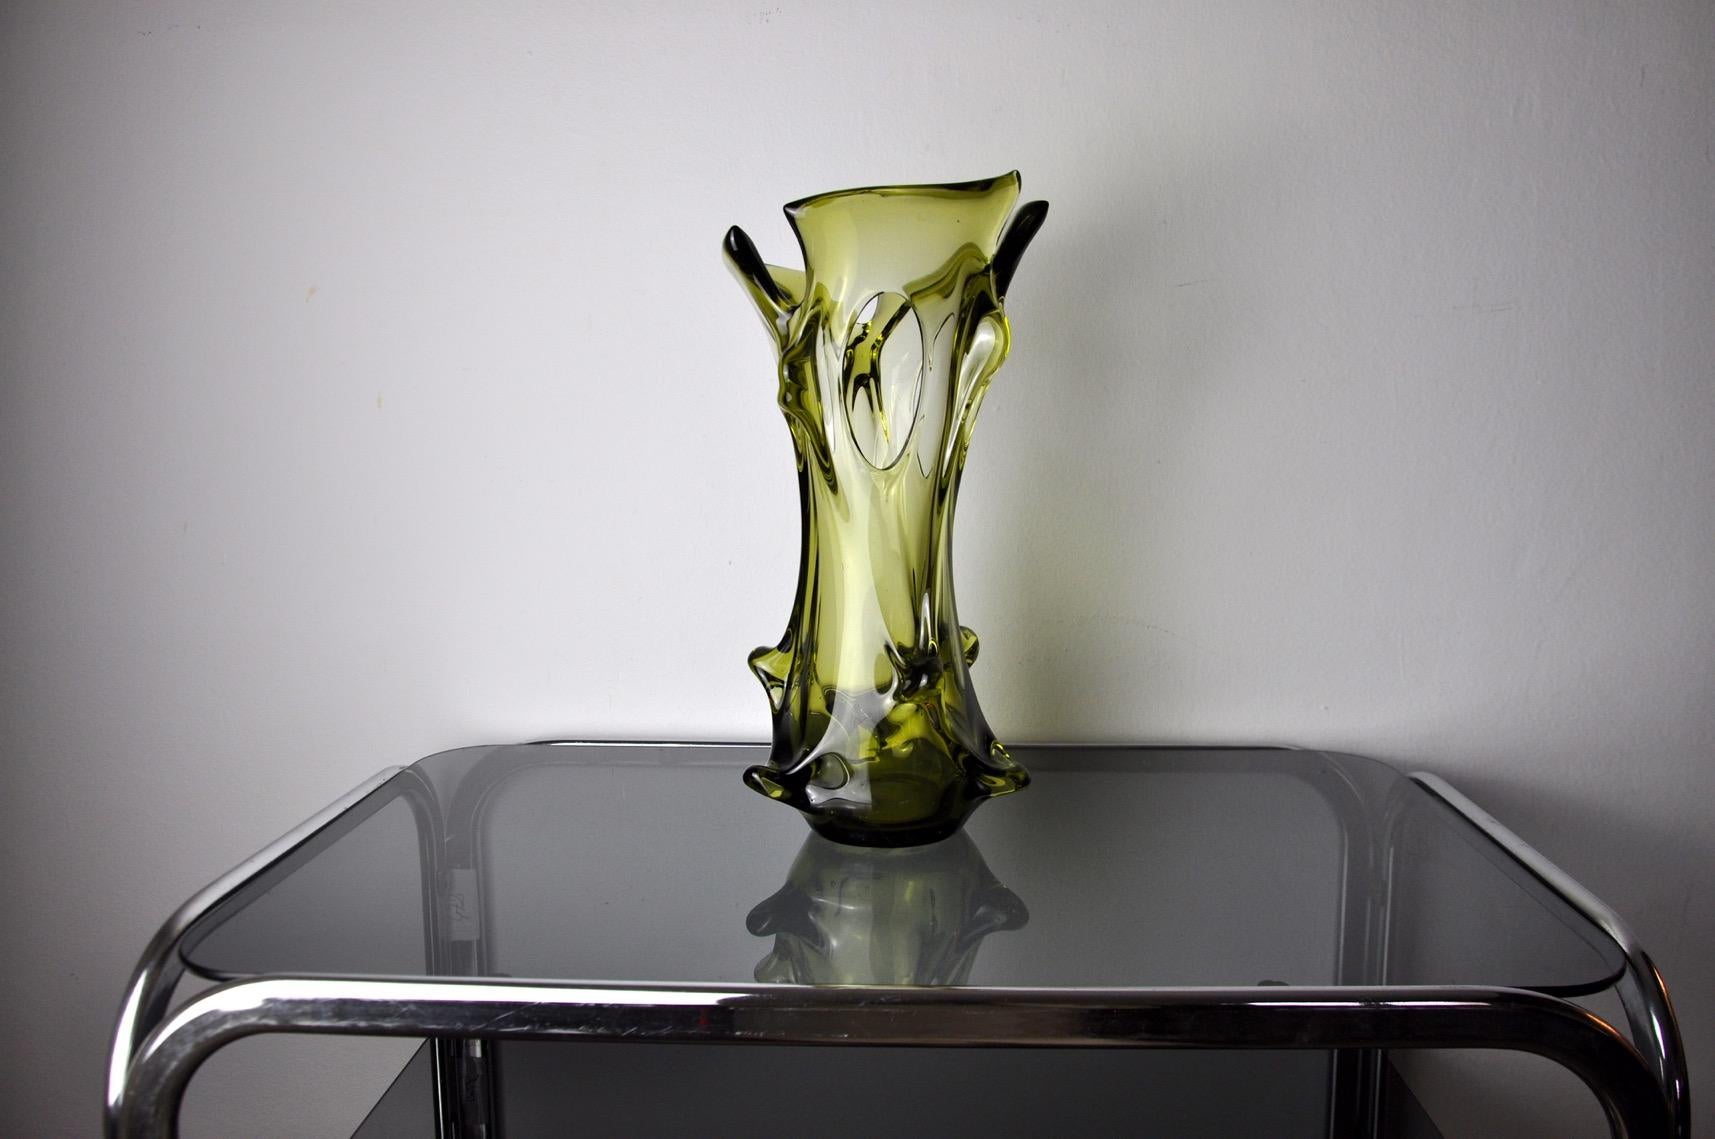 Superb and rare hand blown sommerso green Italian art glass vase. Attributed to Seguso, Murano Italy, 1960s. This large colorful vase has a beautiful design with drawn details and a ribbed edge using the Sommerso technique. Use it as a decorative